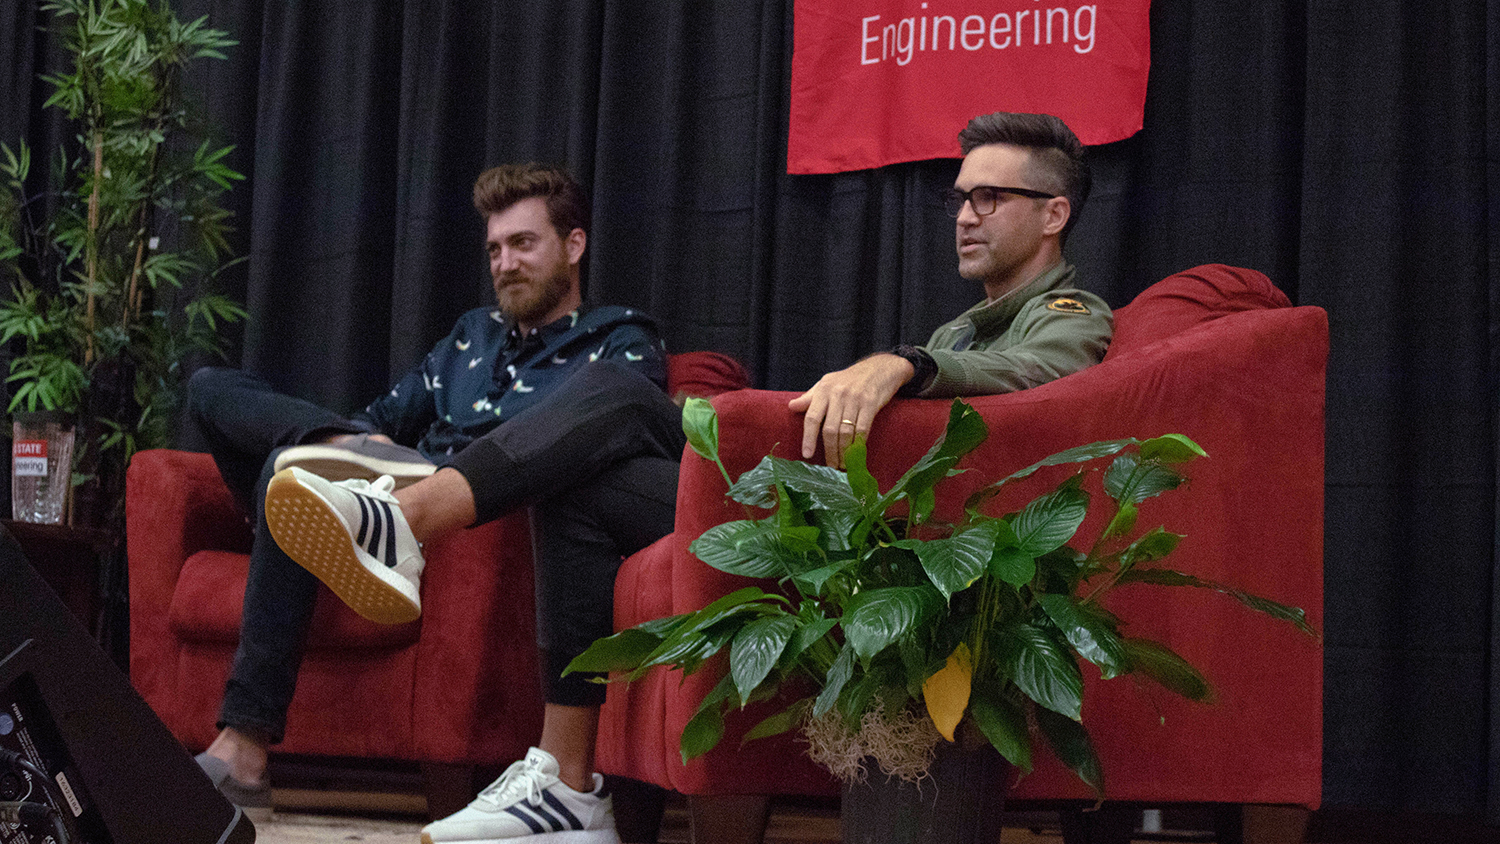 Rhett and Link returned to NC State Saturday to speak to a sold-out crowd in Hunt Auditorium on NC State’s Centennial Campus, talking about their non-traditional path into entertainment and their advice for students. (Photo: October 2018)